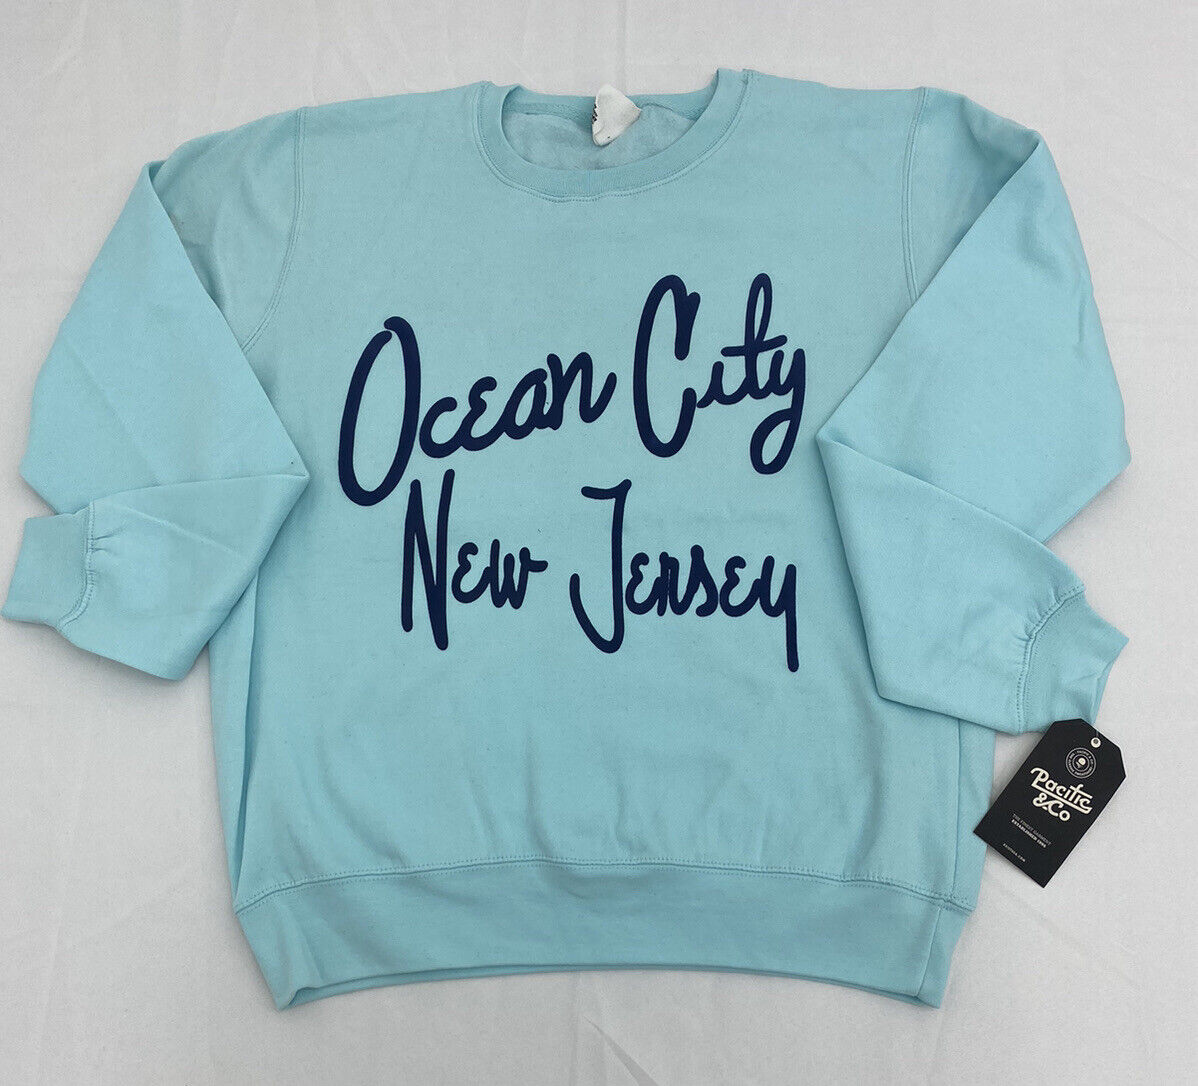 Pacific & Co Ocean City New Jersey Seablue Sweatshirt Adult Size XLarge New